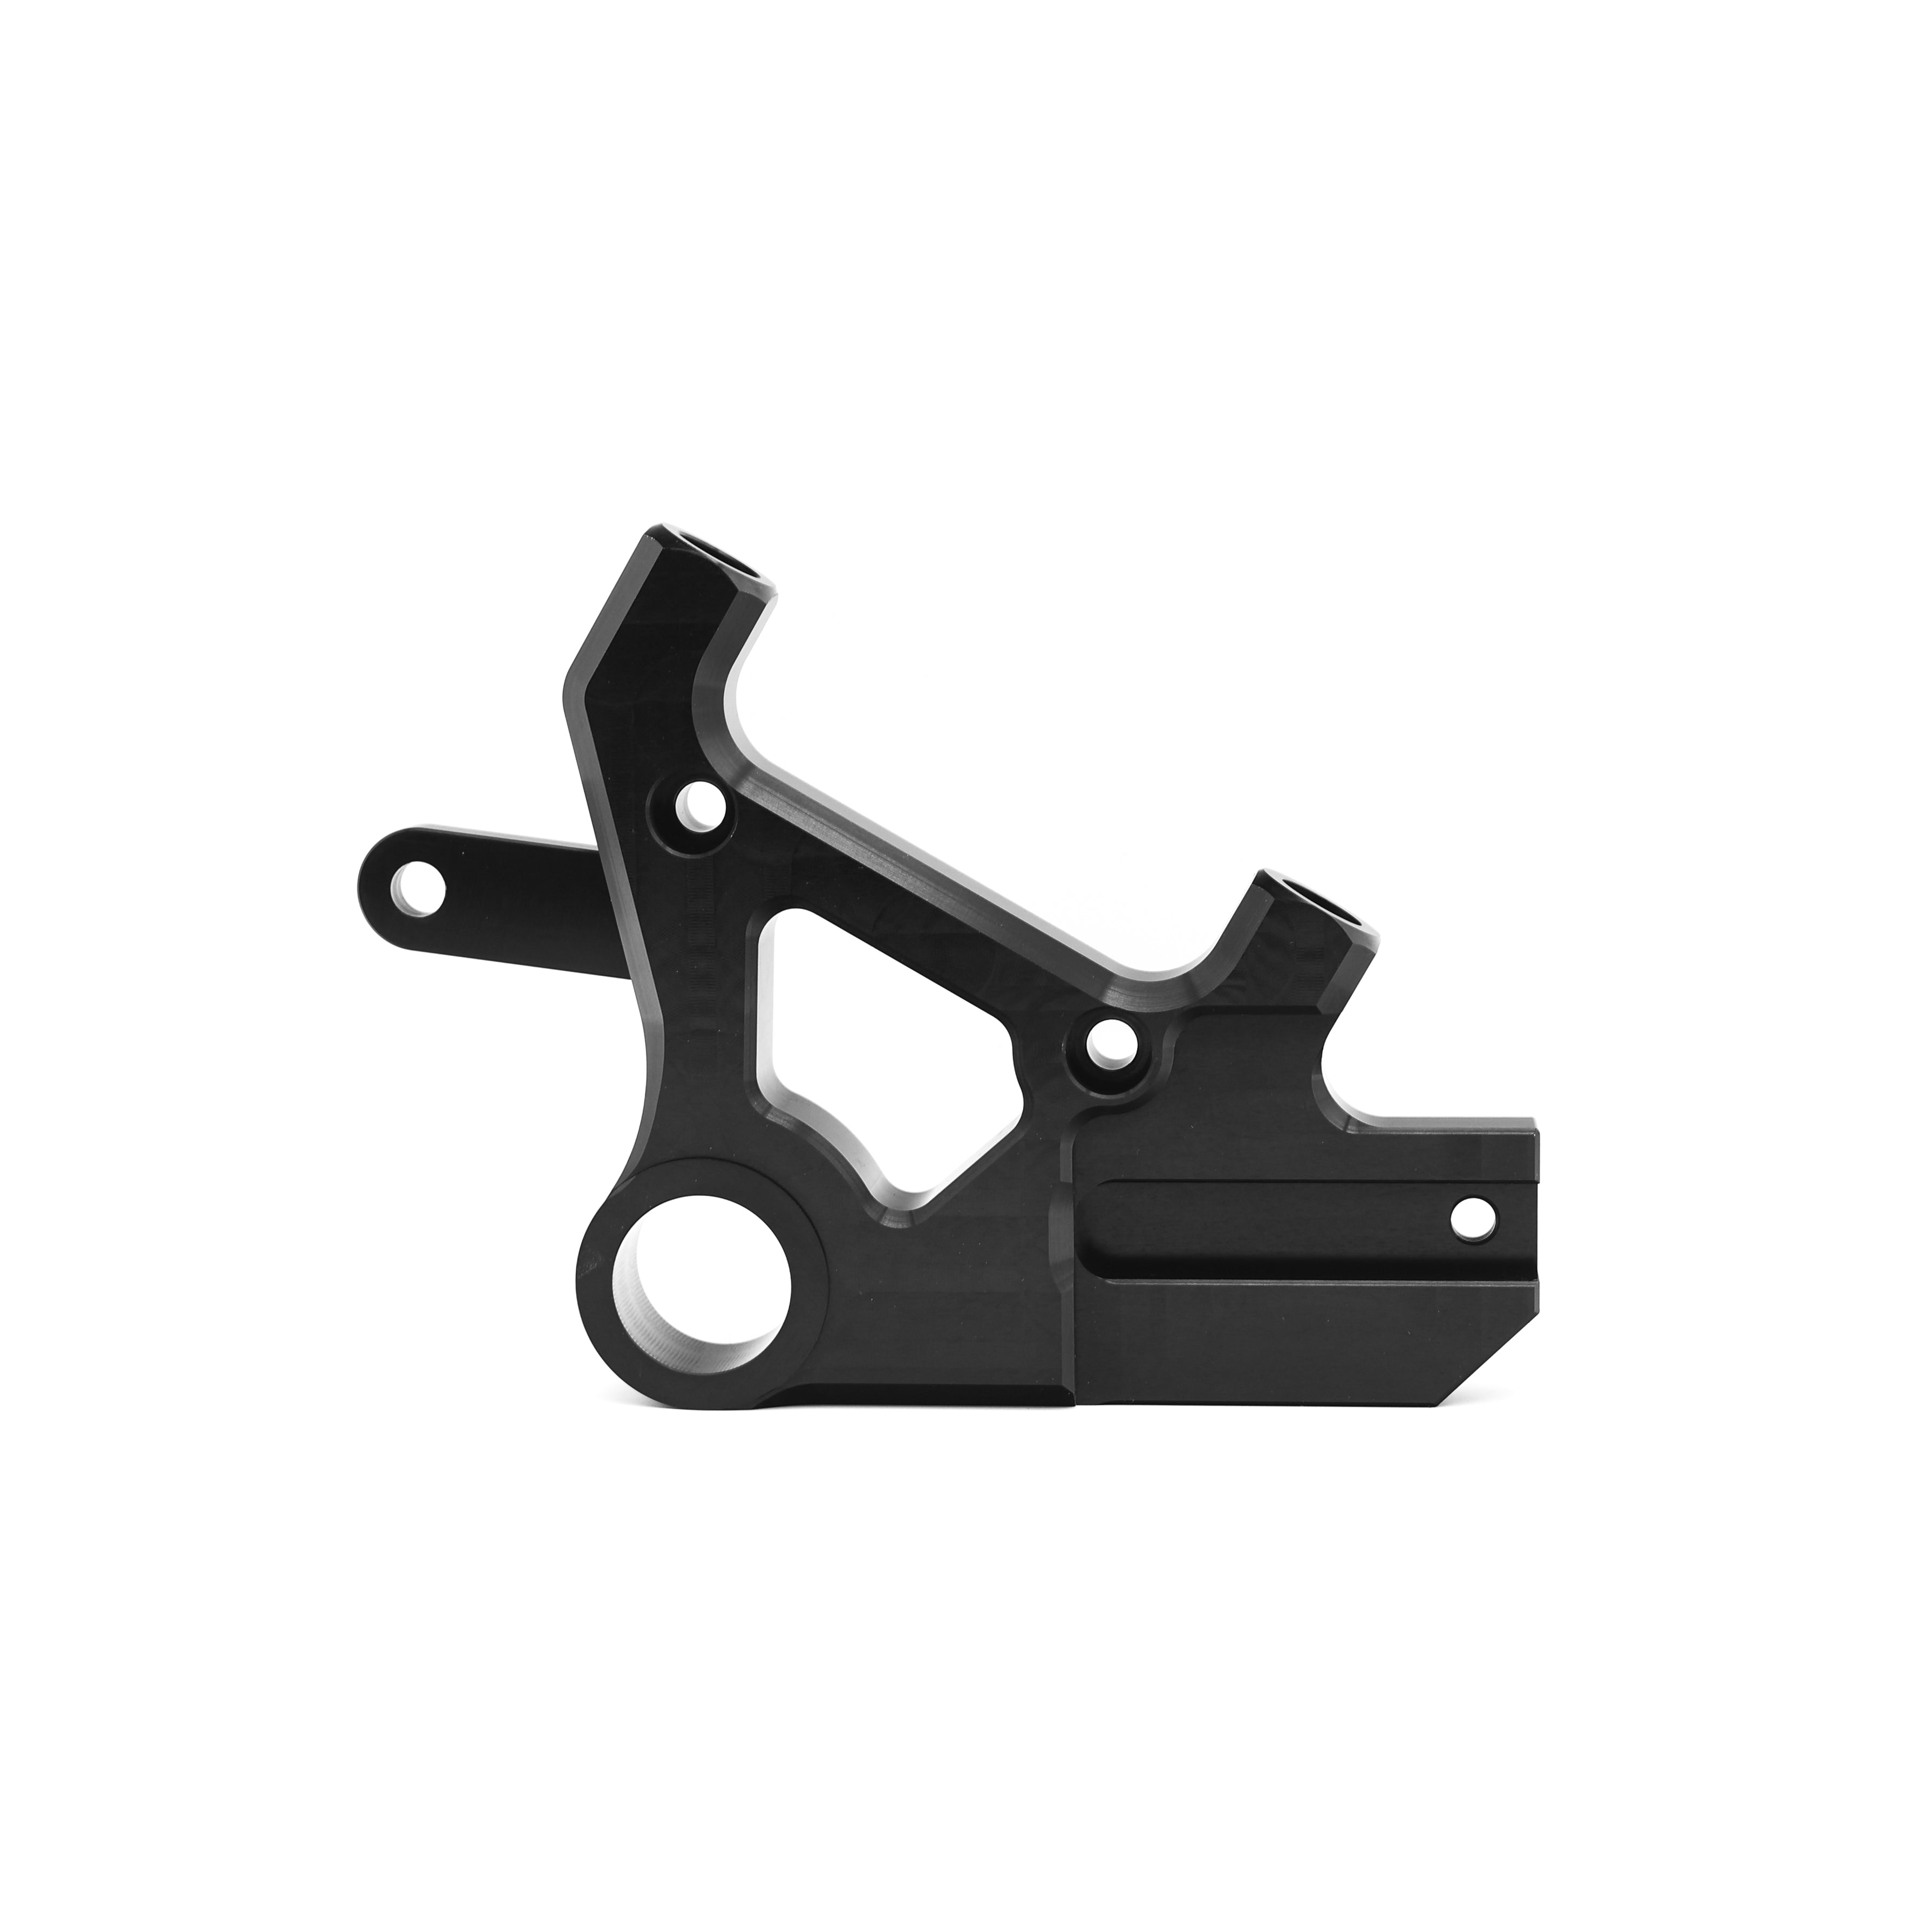 Rear radial caliper support for TMAX